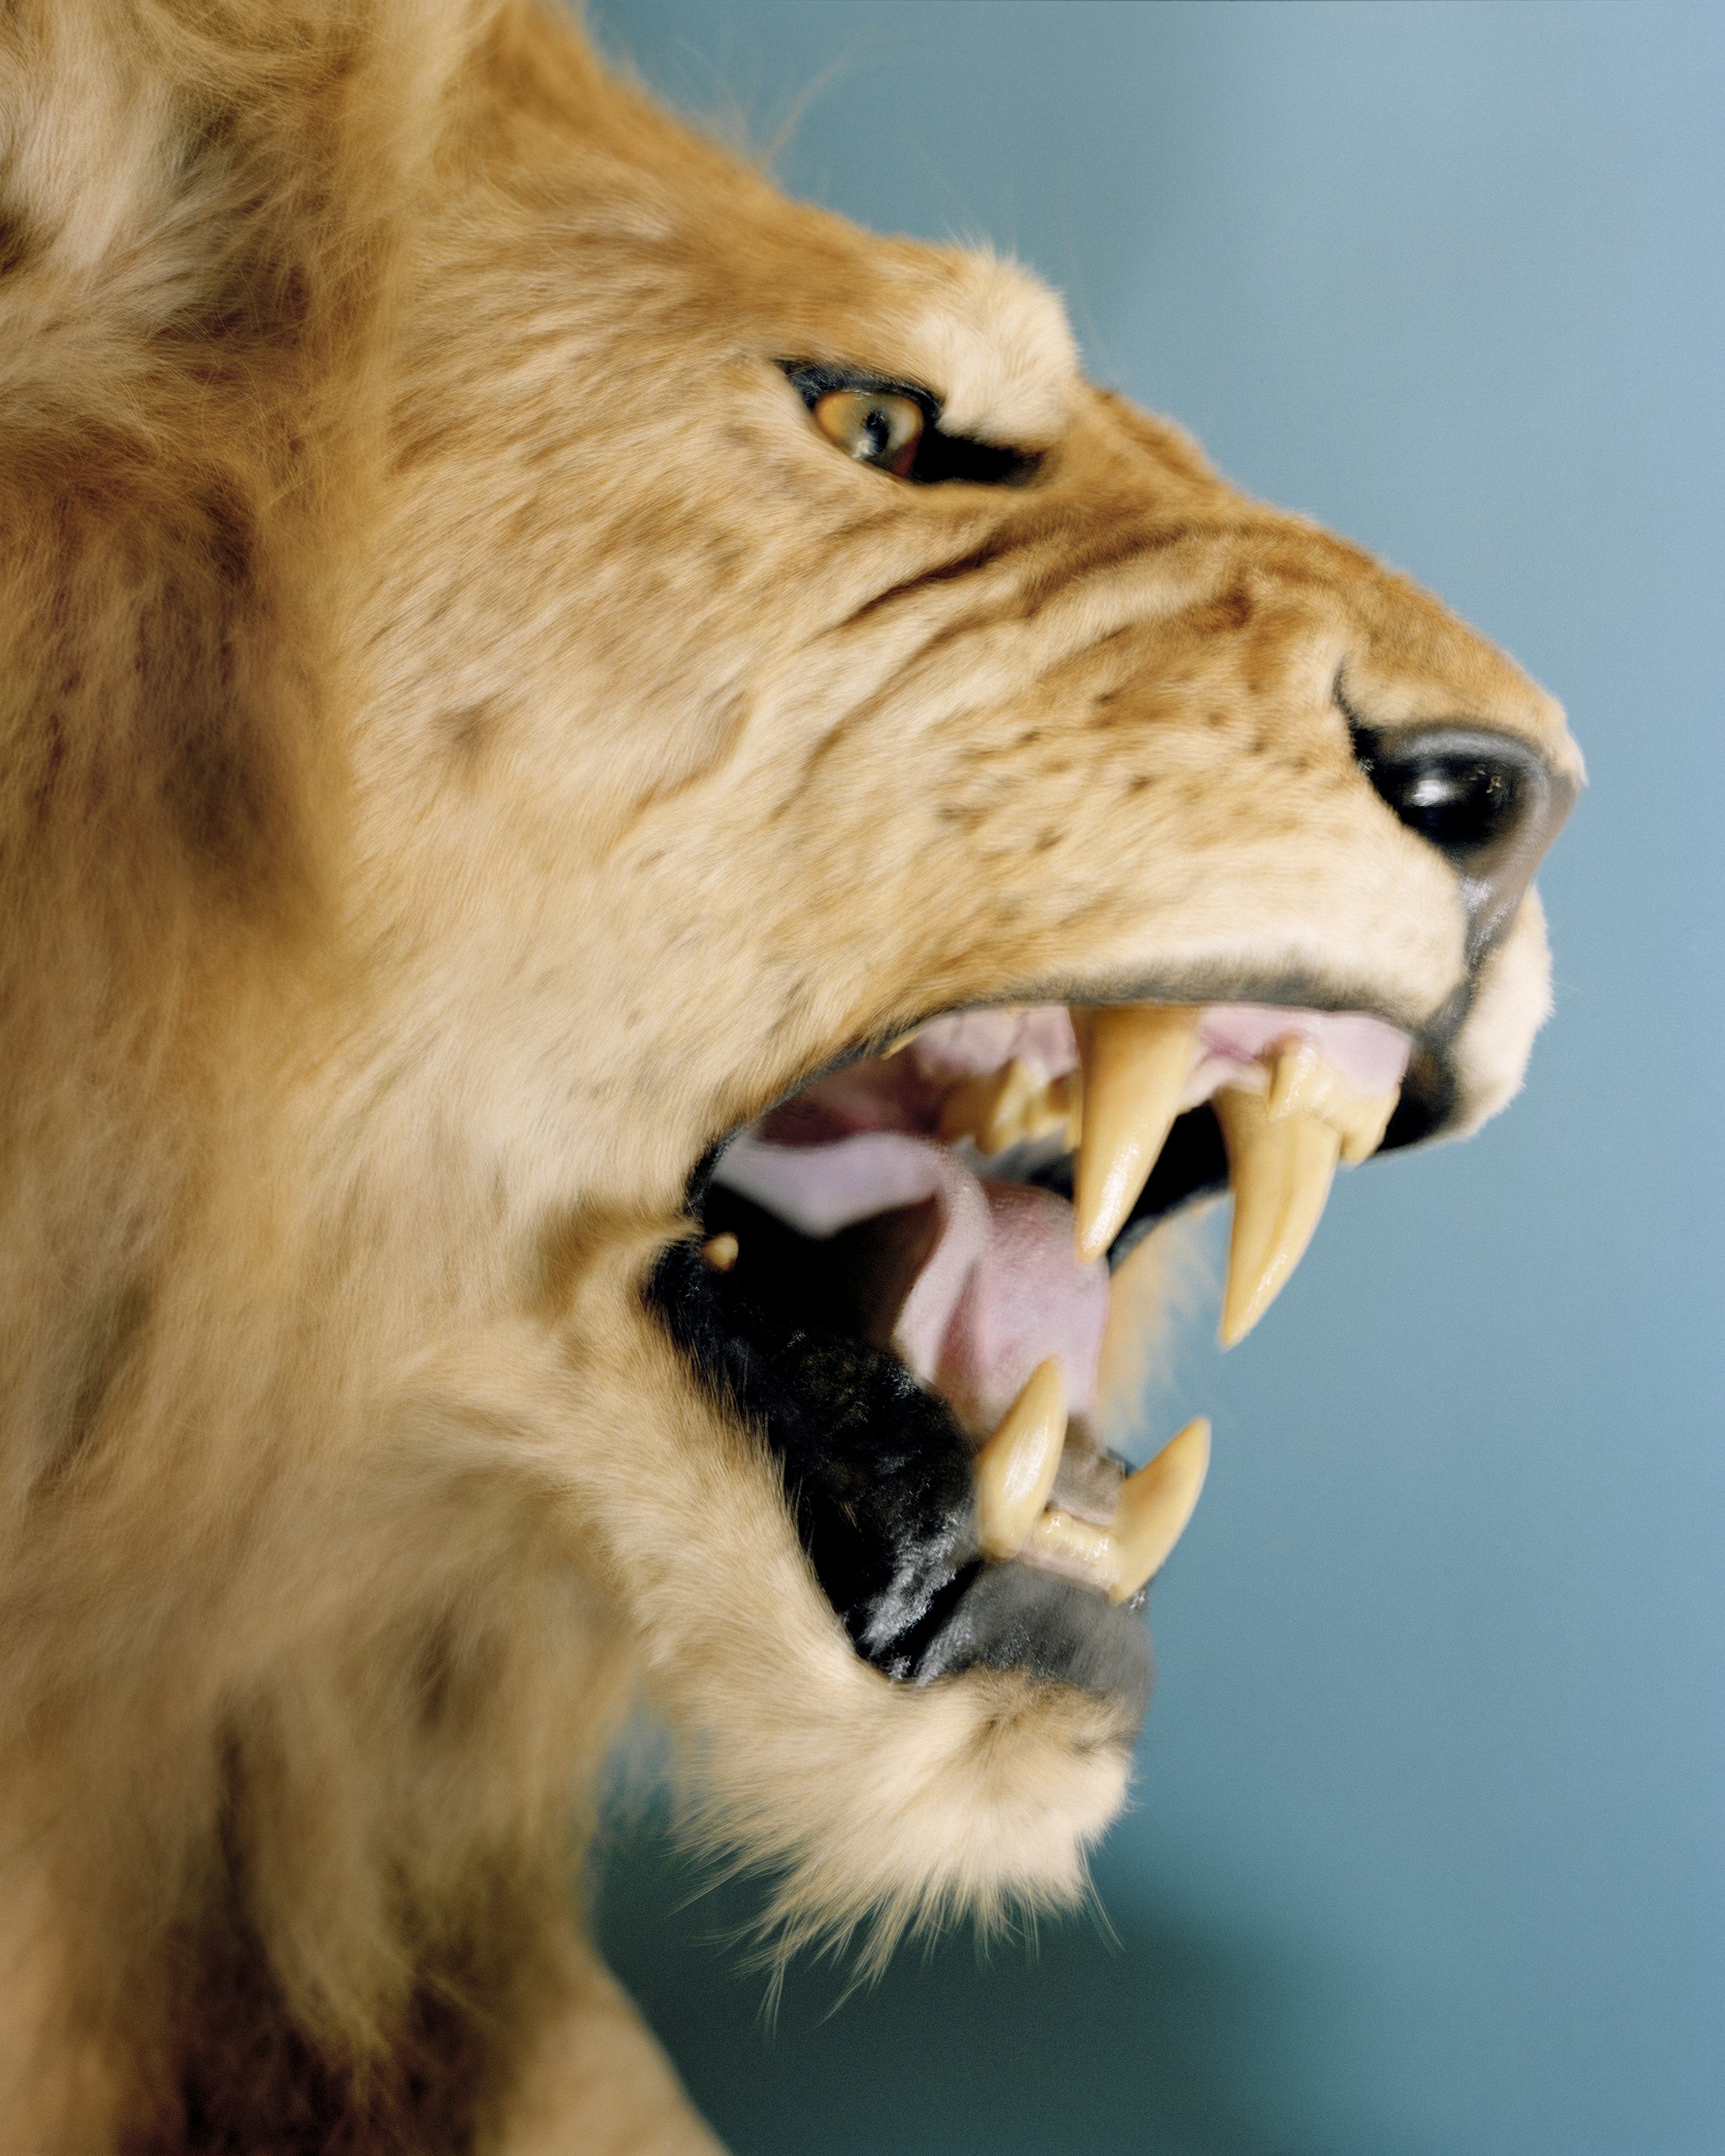 Image of a lion with sharp teeth